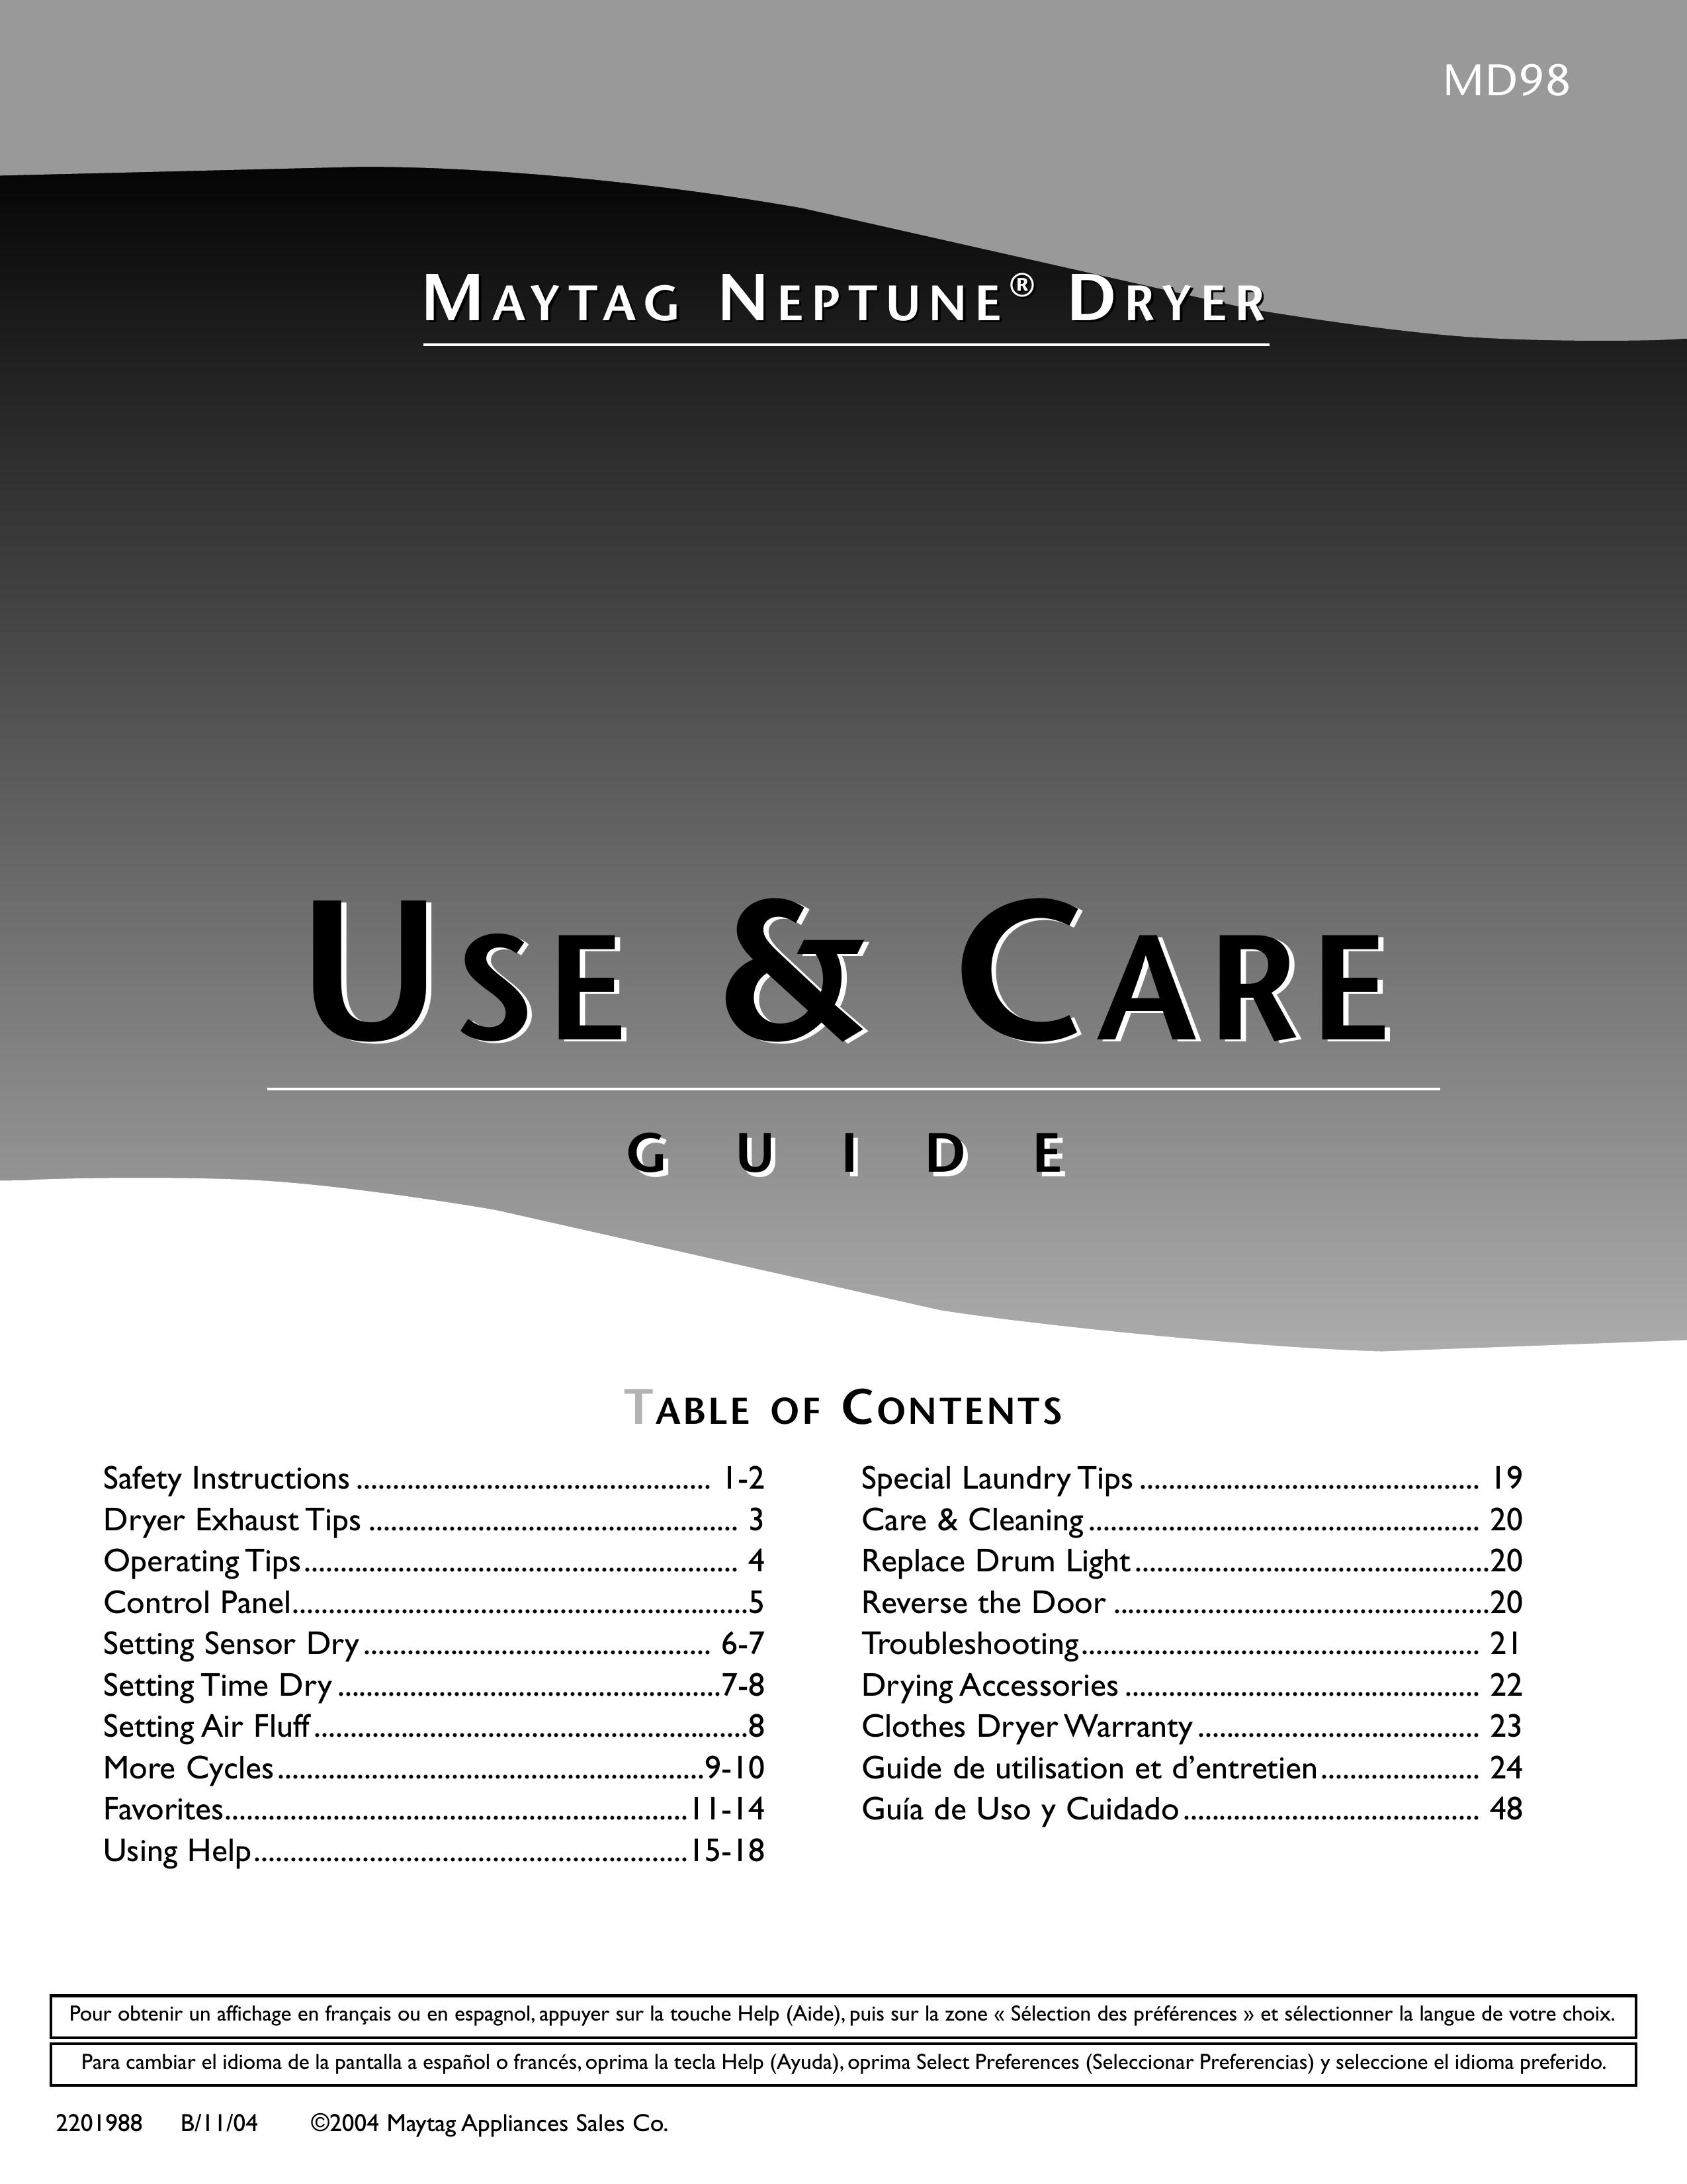 Maytag MD98 Clothes Dryer User Manual